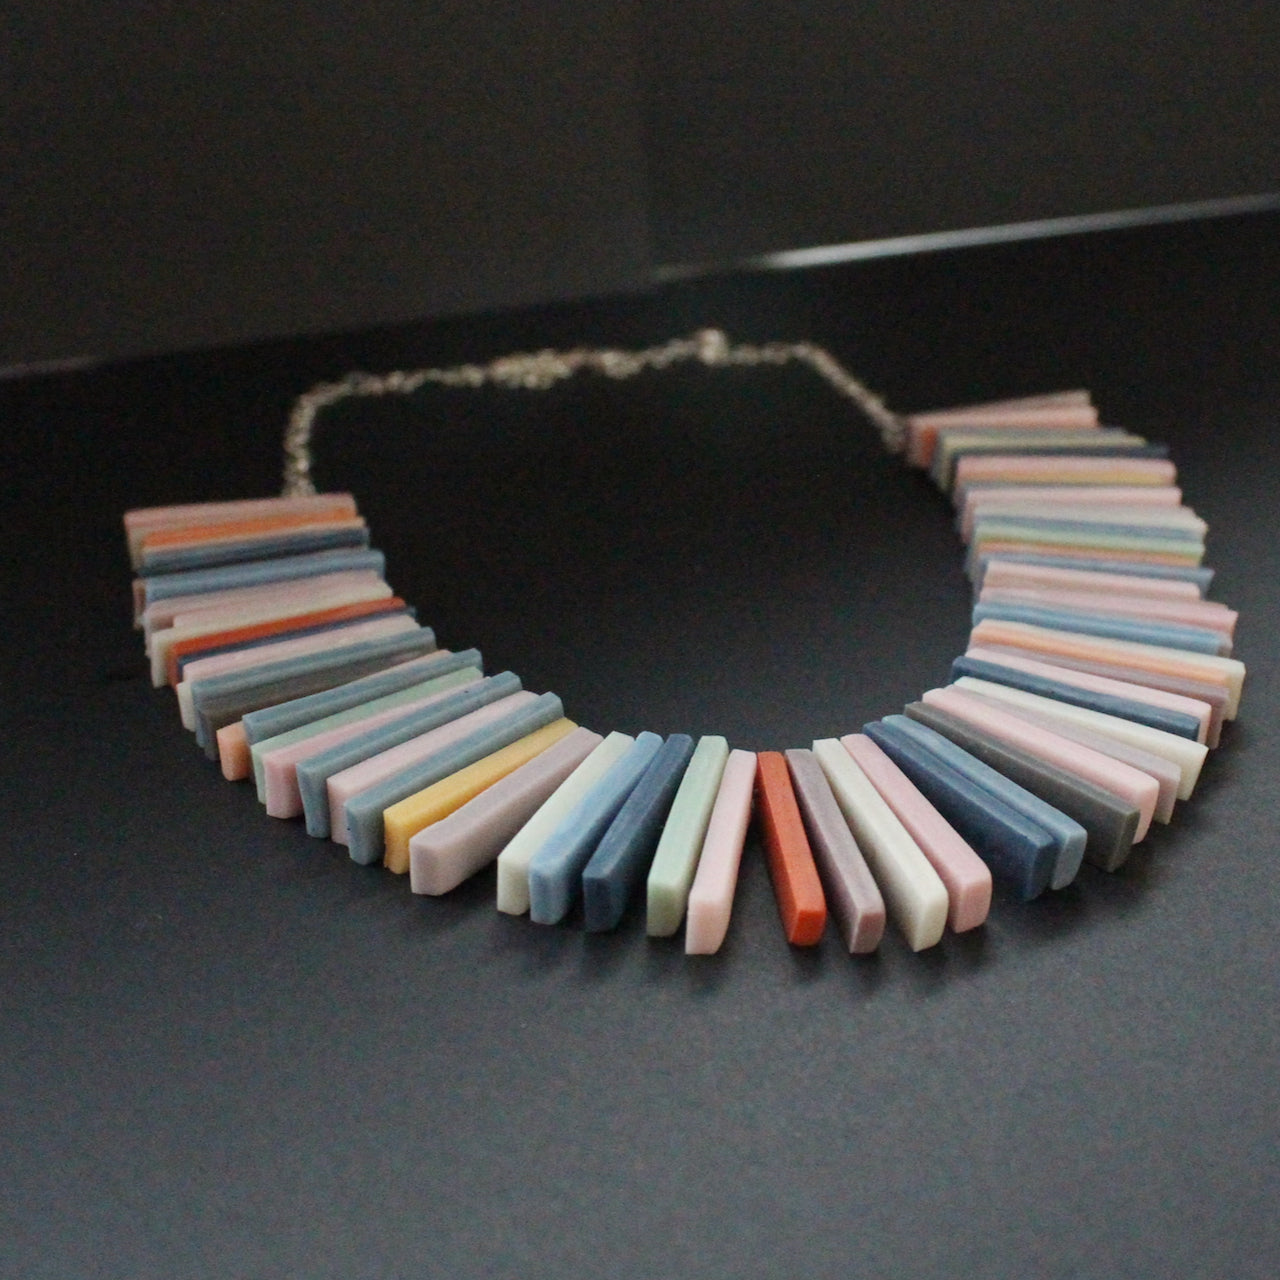 Polymer & resin clay rectangles in muted earth tones necklace by artist Clare Lloyd